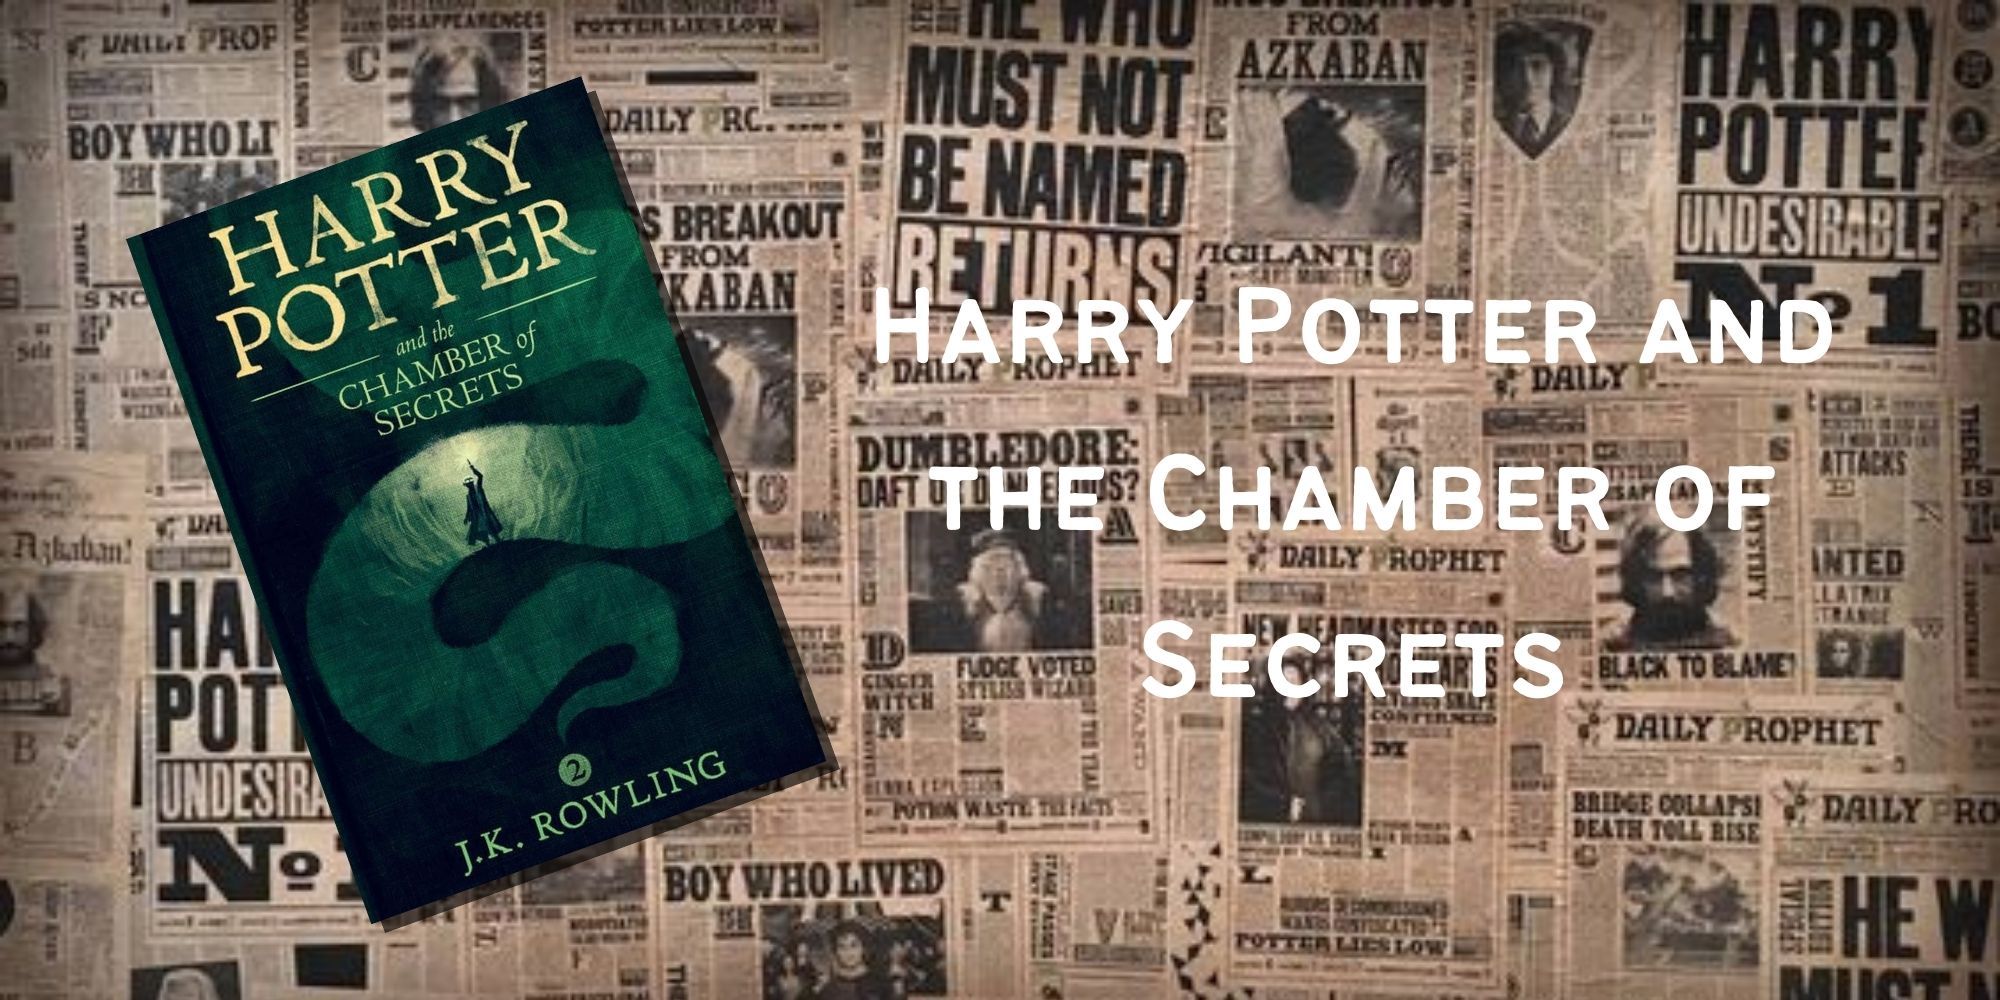 The cover of Harry Potter and the Chamber of Secrets